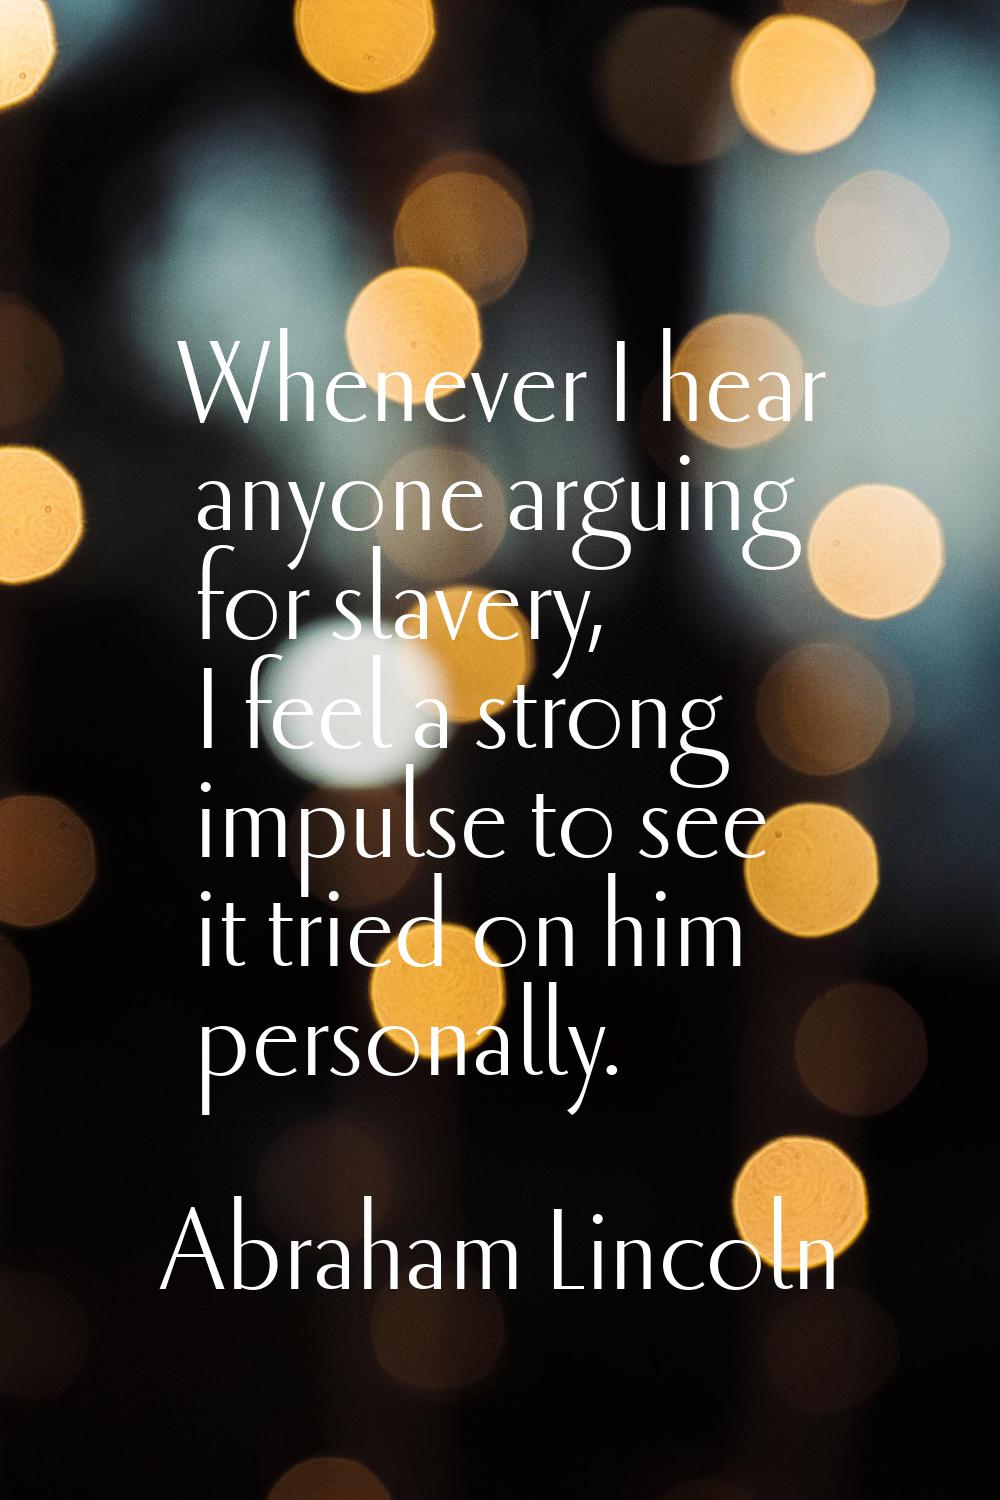 Whenever I hear anyone arguing for slavery, I feel a strong impulse to see it tried on him personal